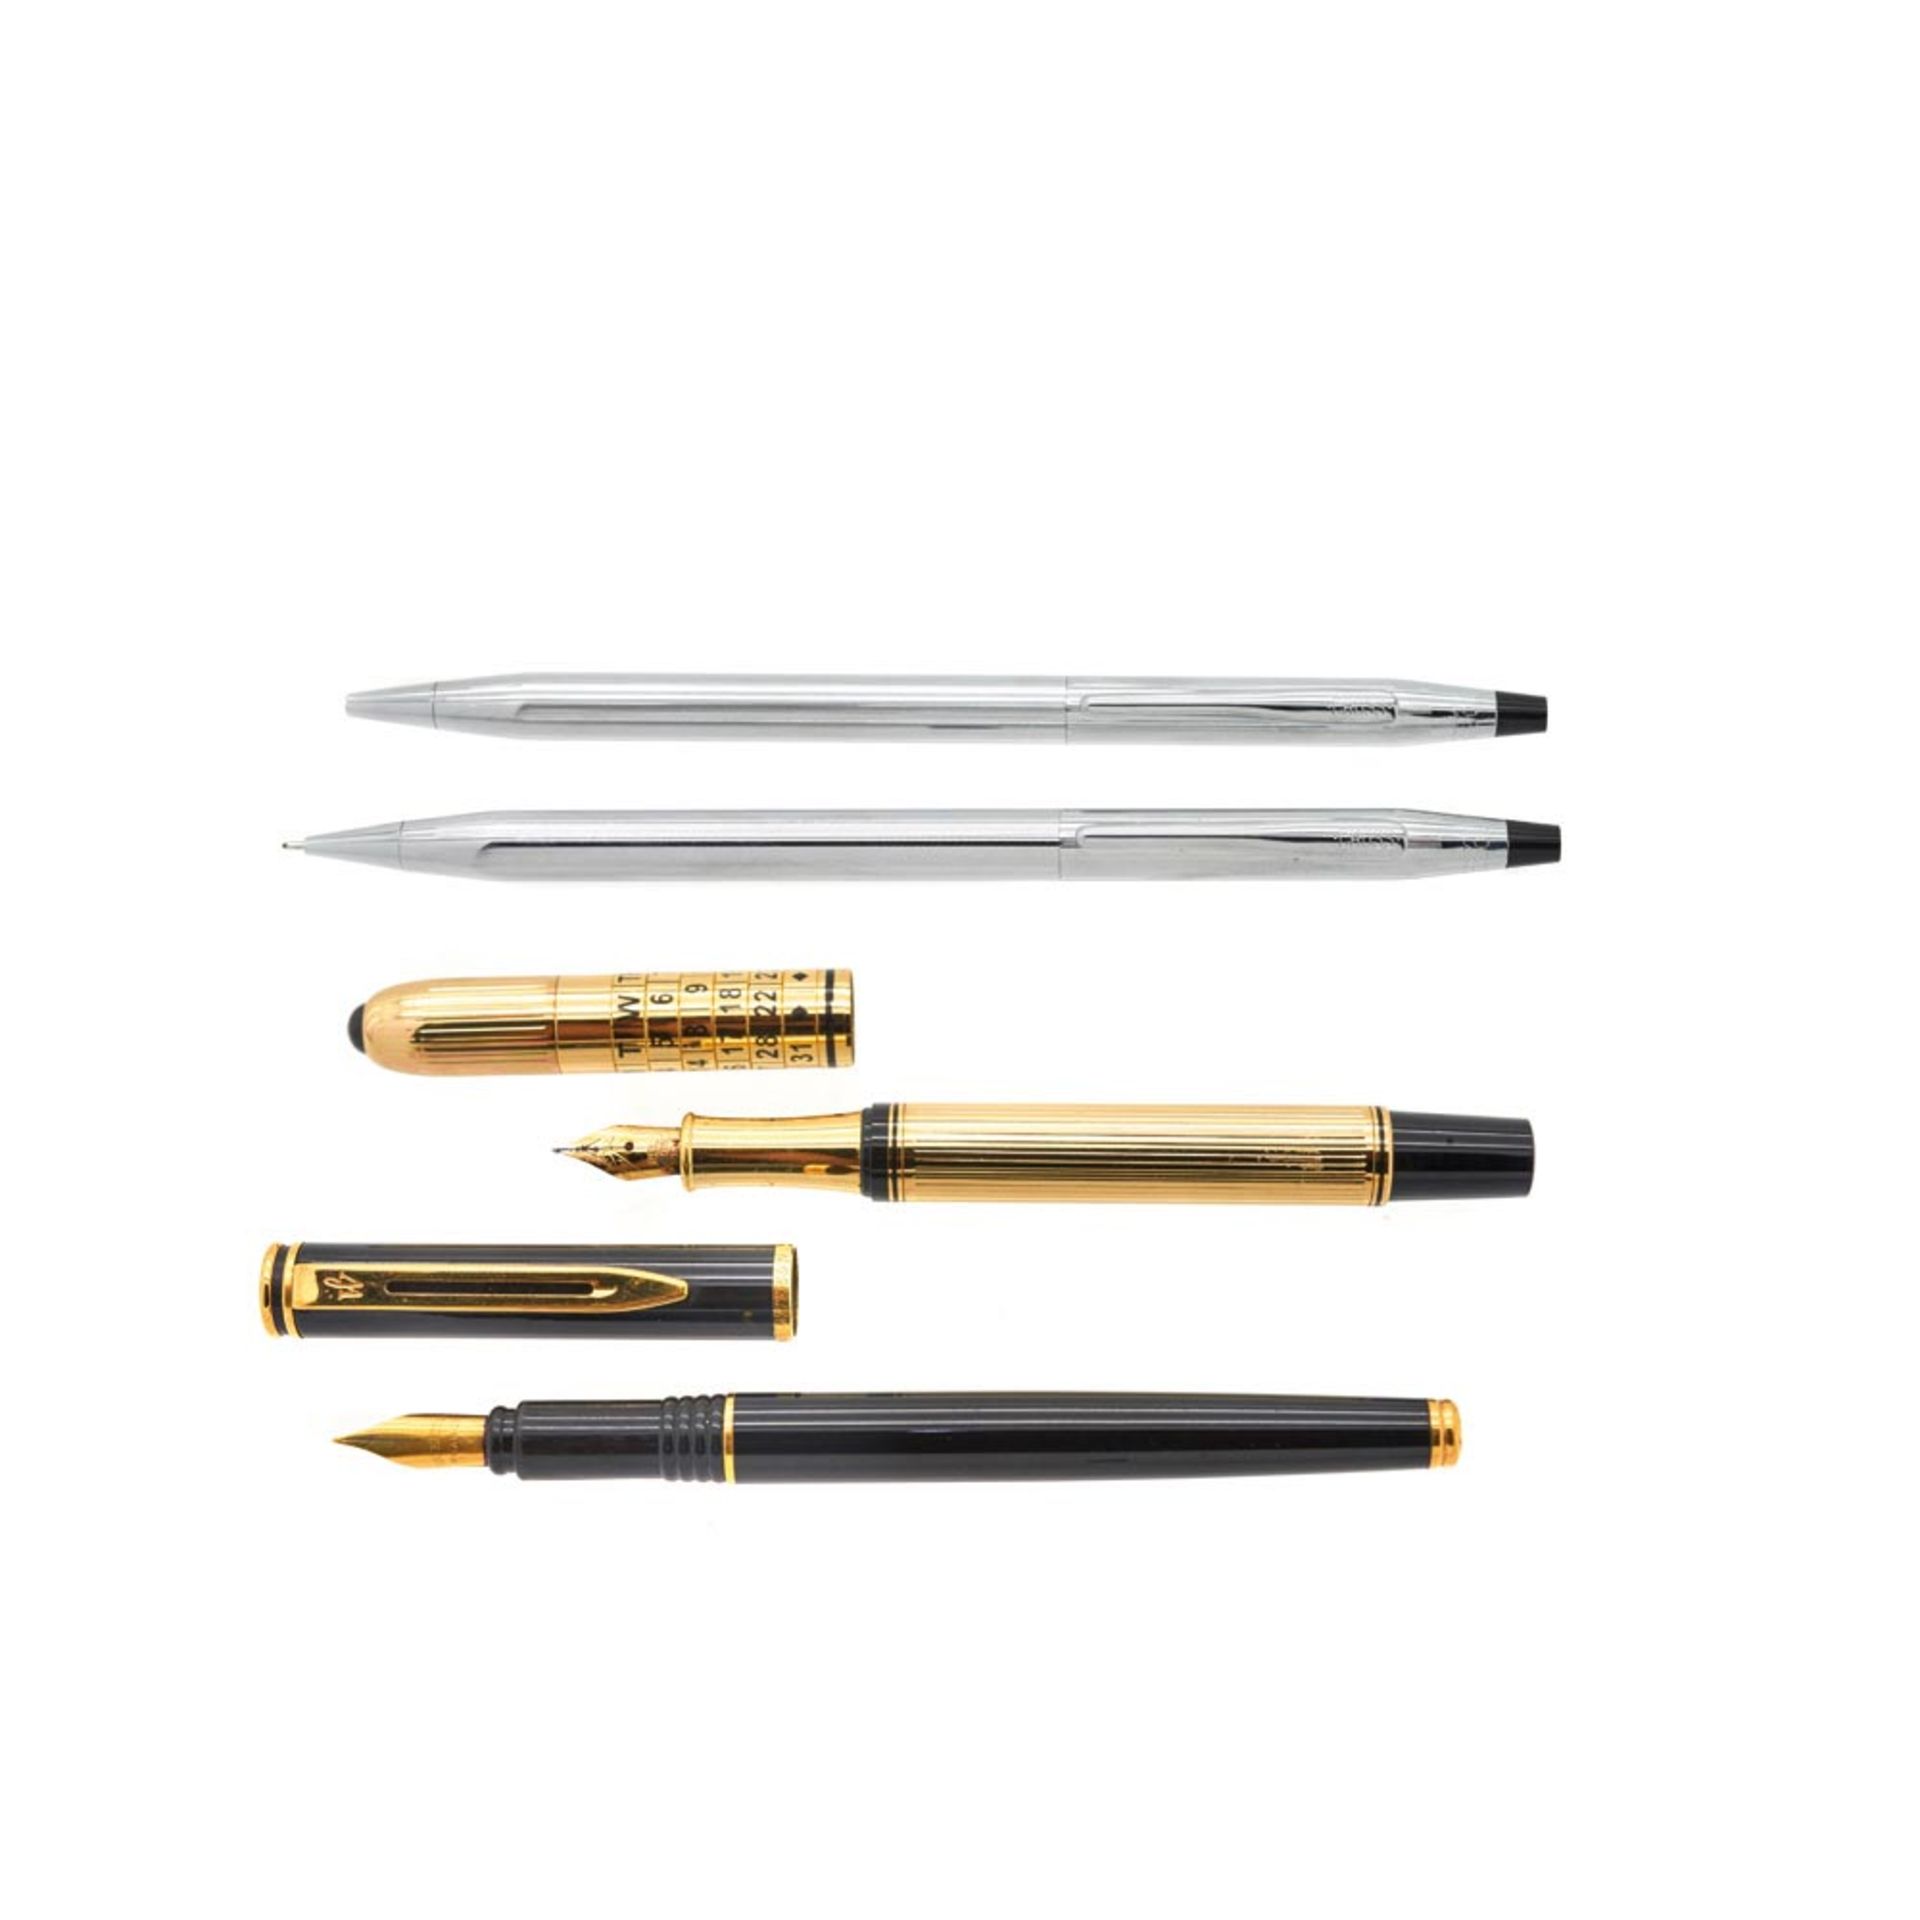 Waterman and BG black resin fountain pens lot and Cross steel mechanical pencil and pen set